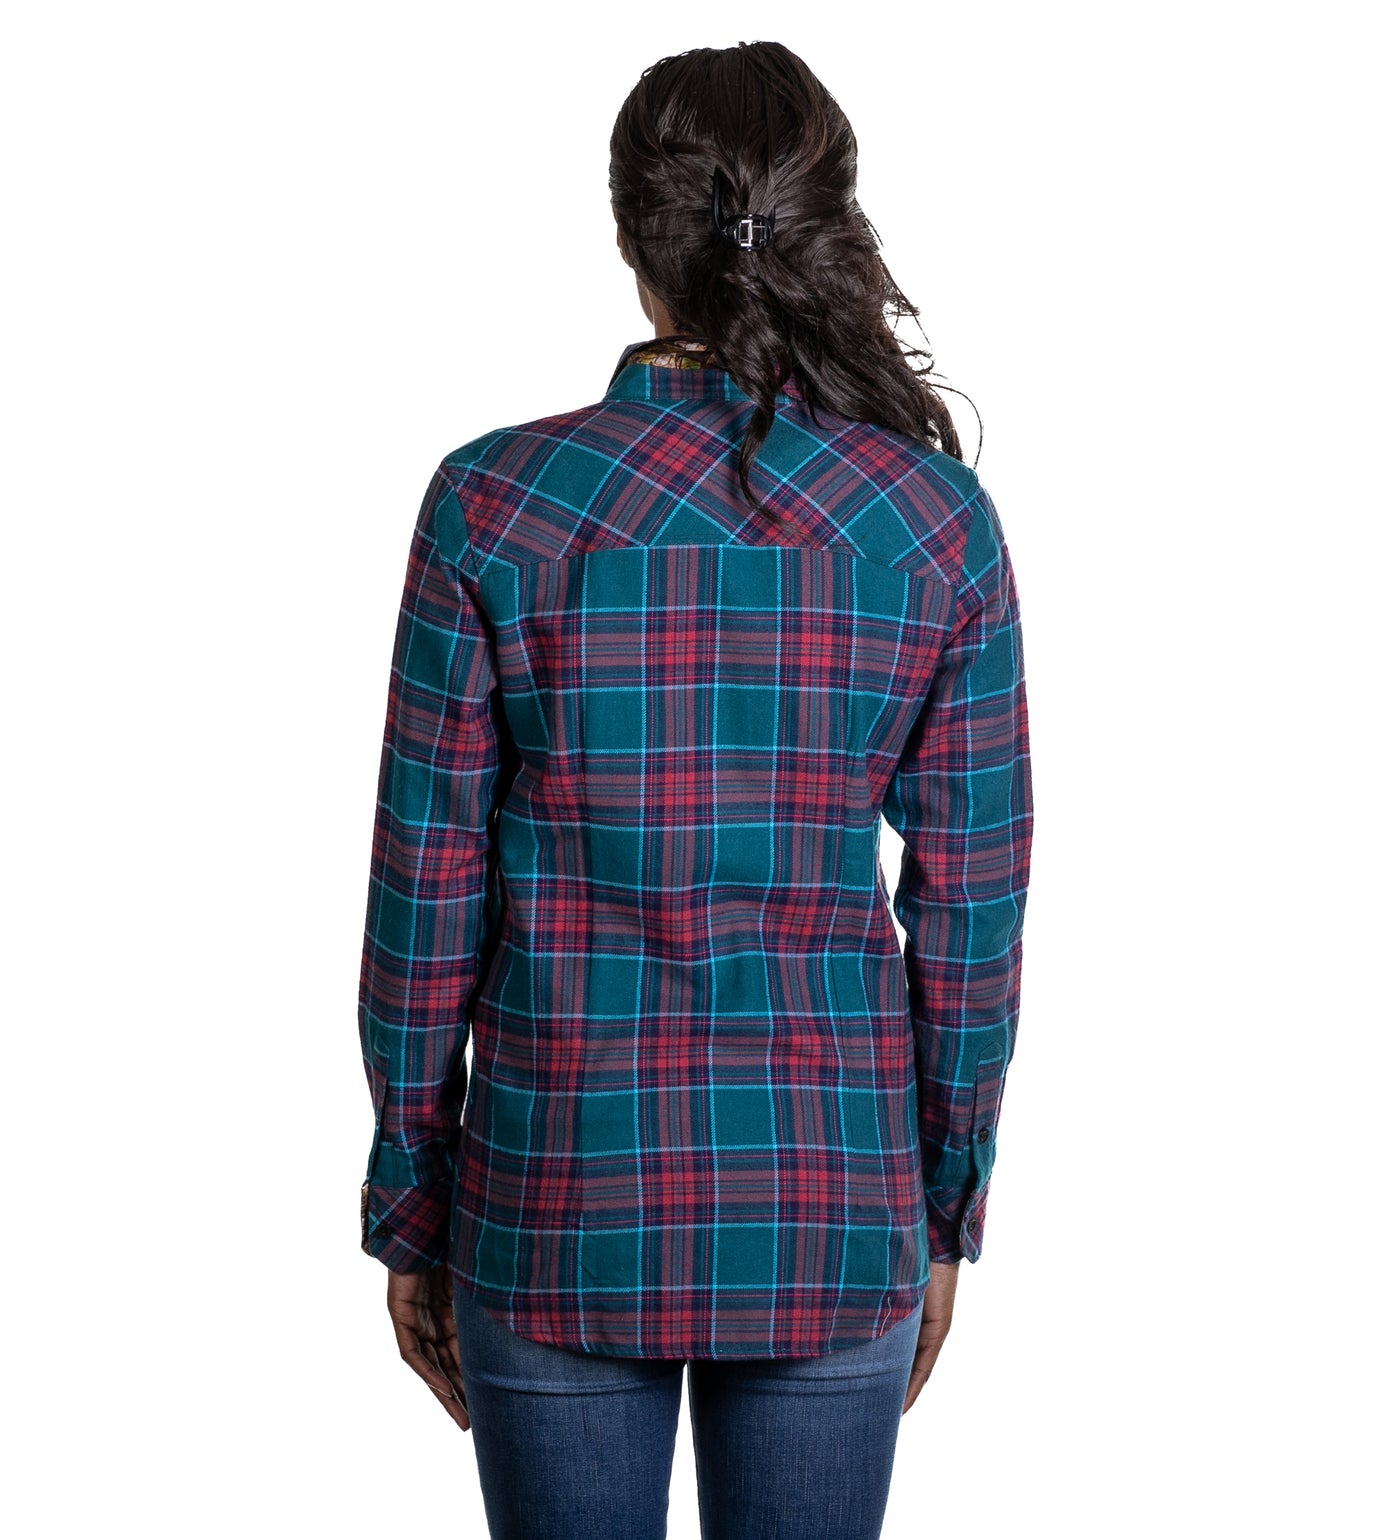 Women's Every Day Flannel Shirt- Belize Blue